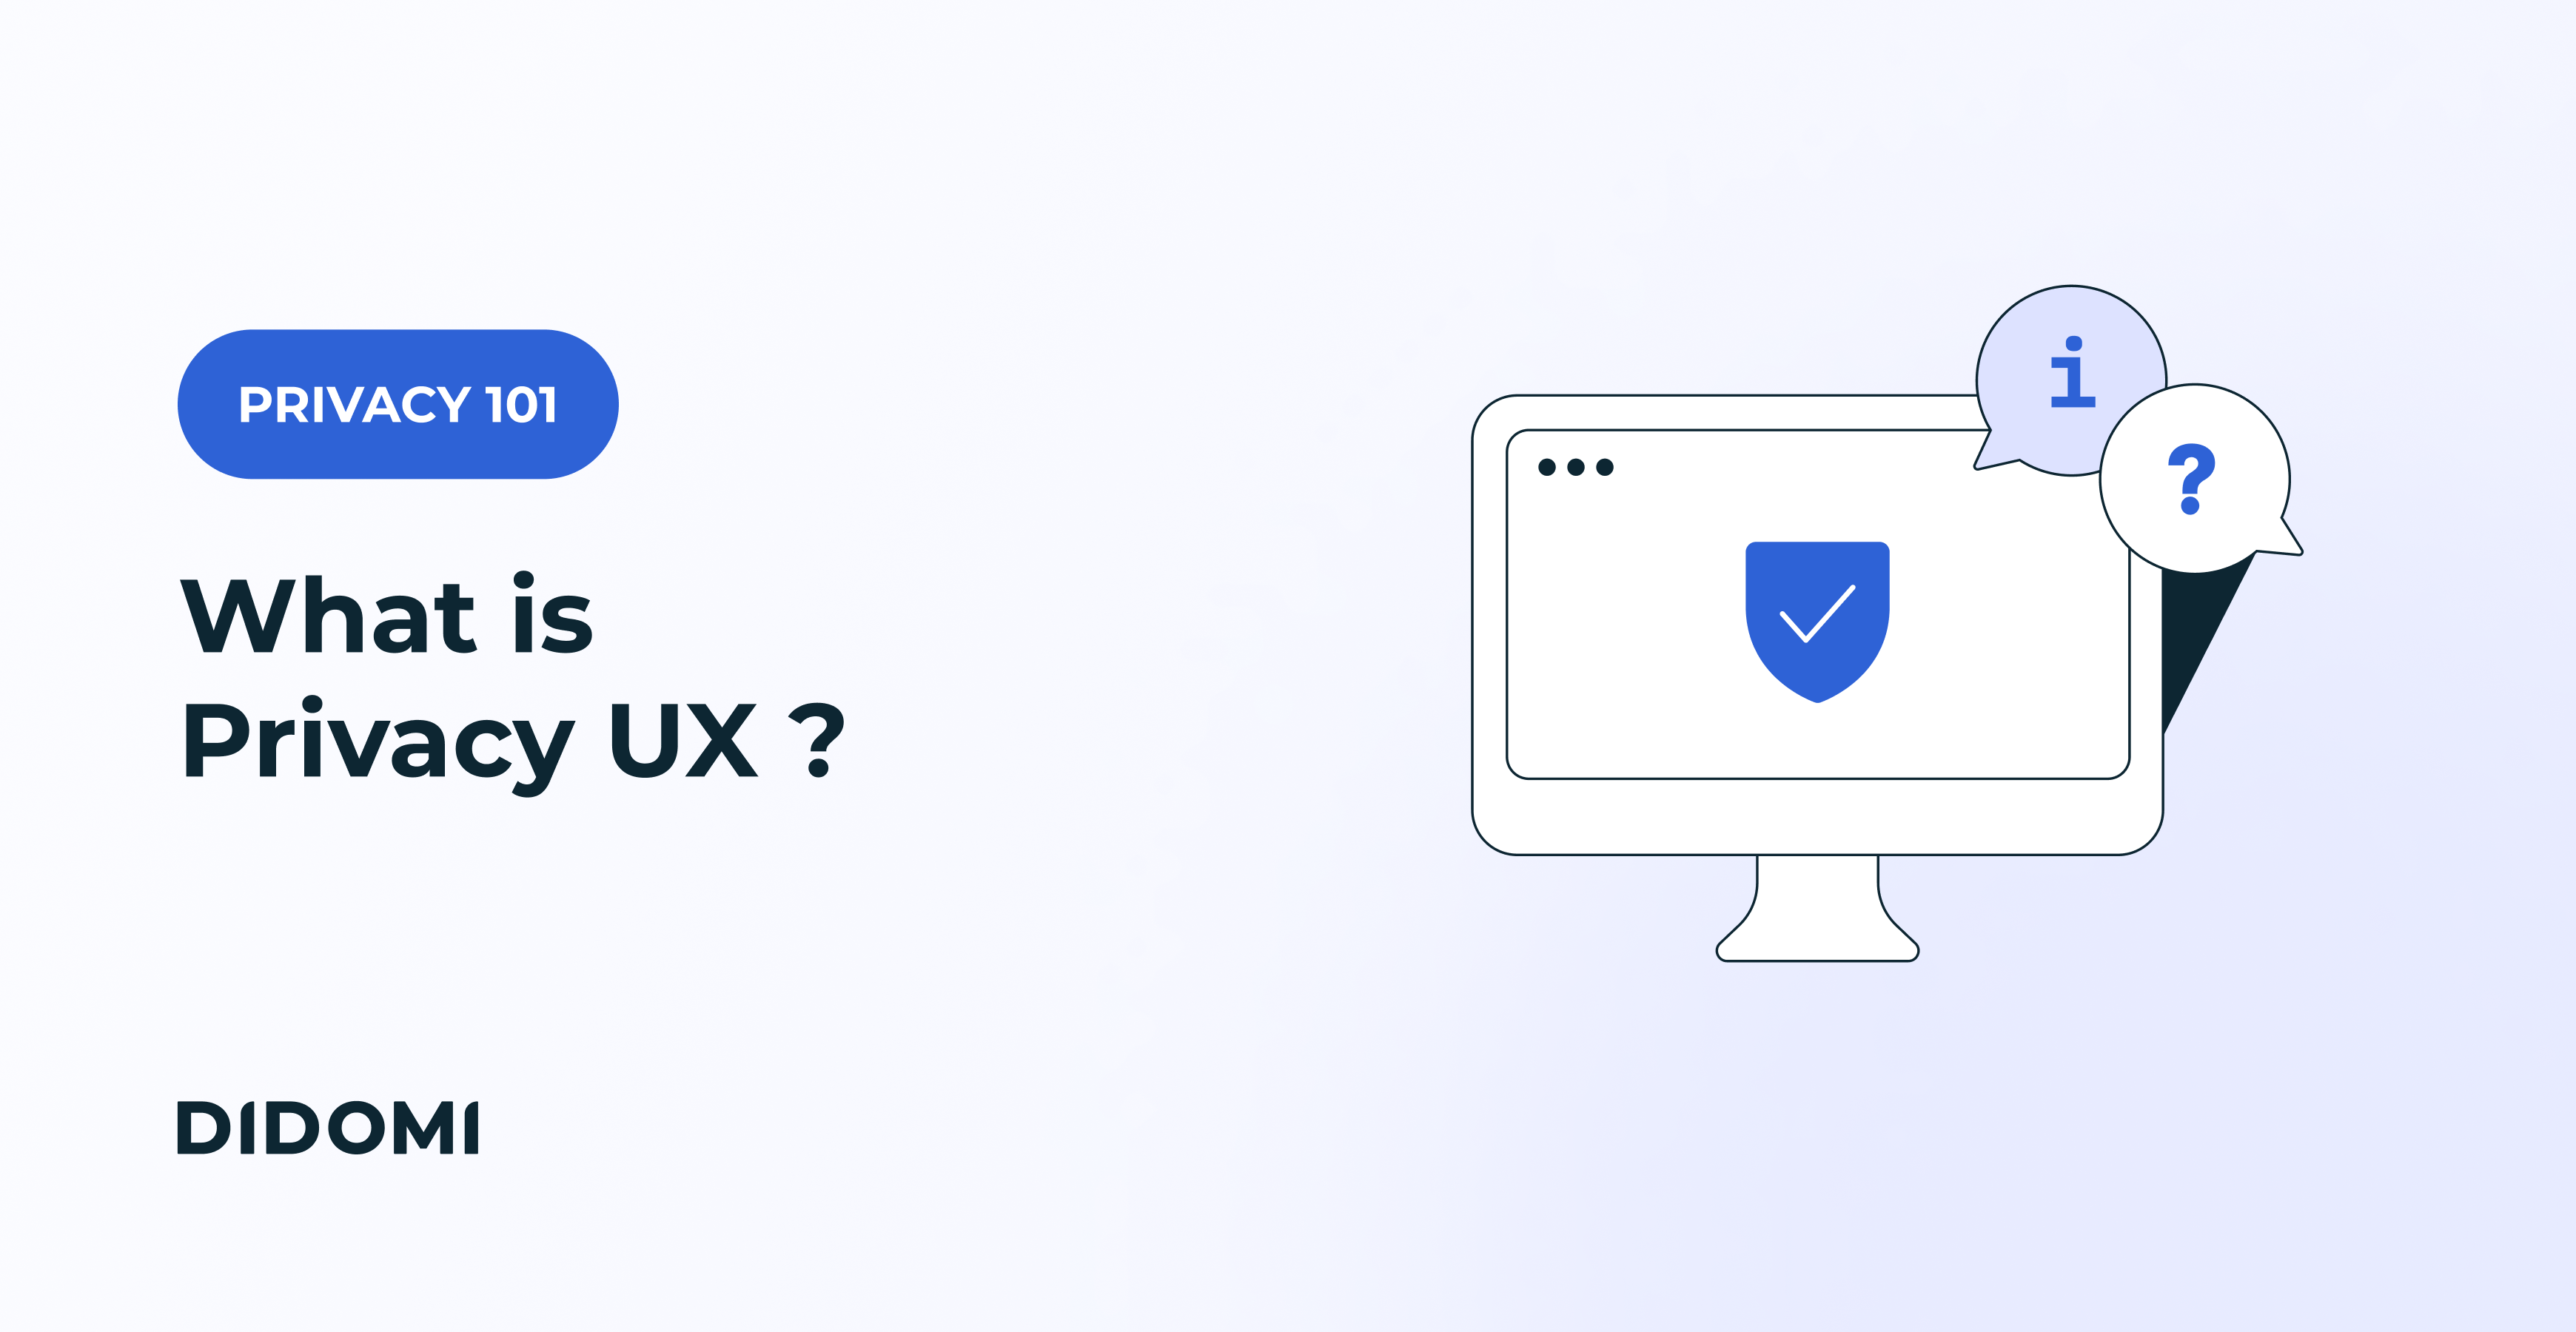 Didomi - What is Privacy UX